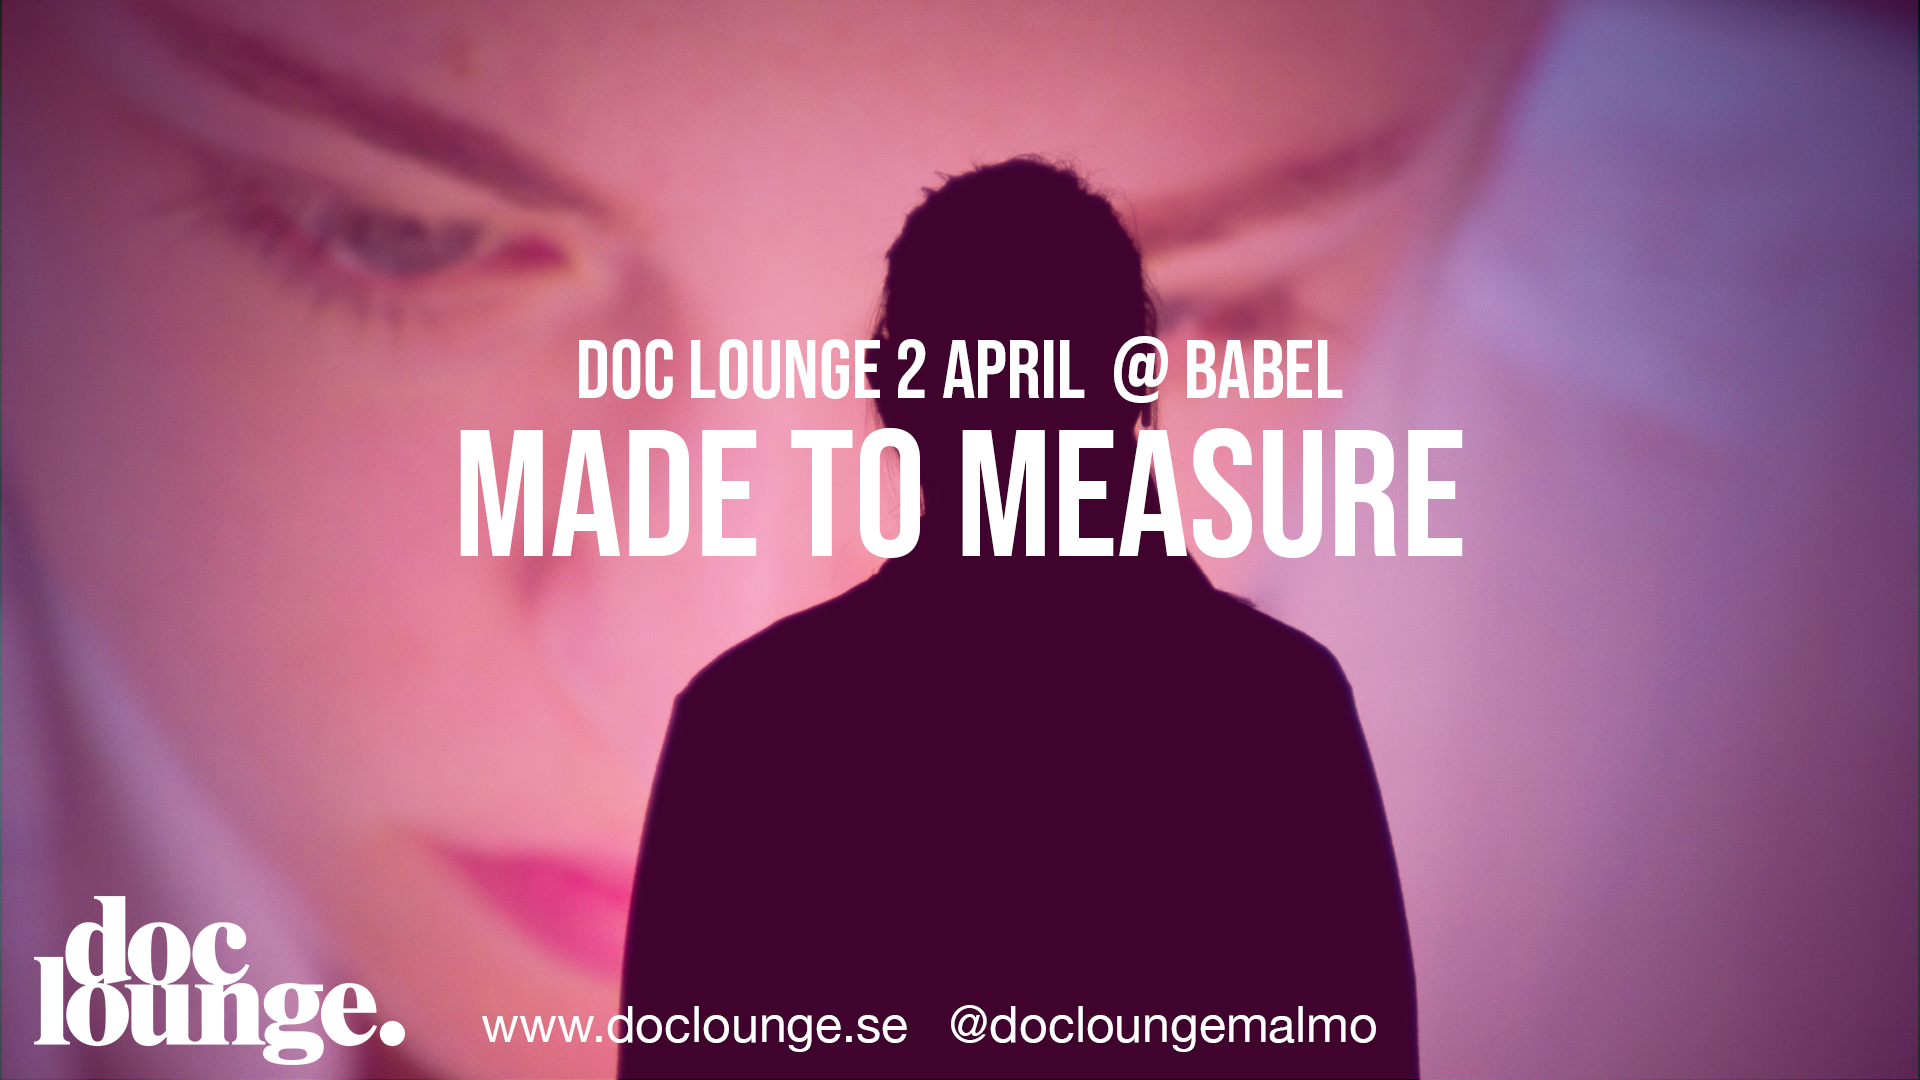 Doc Lounge pres. Made to measure